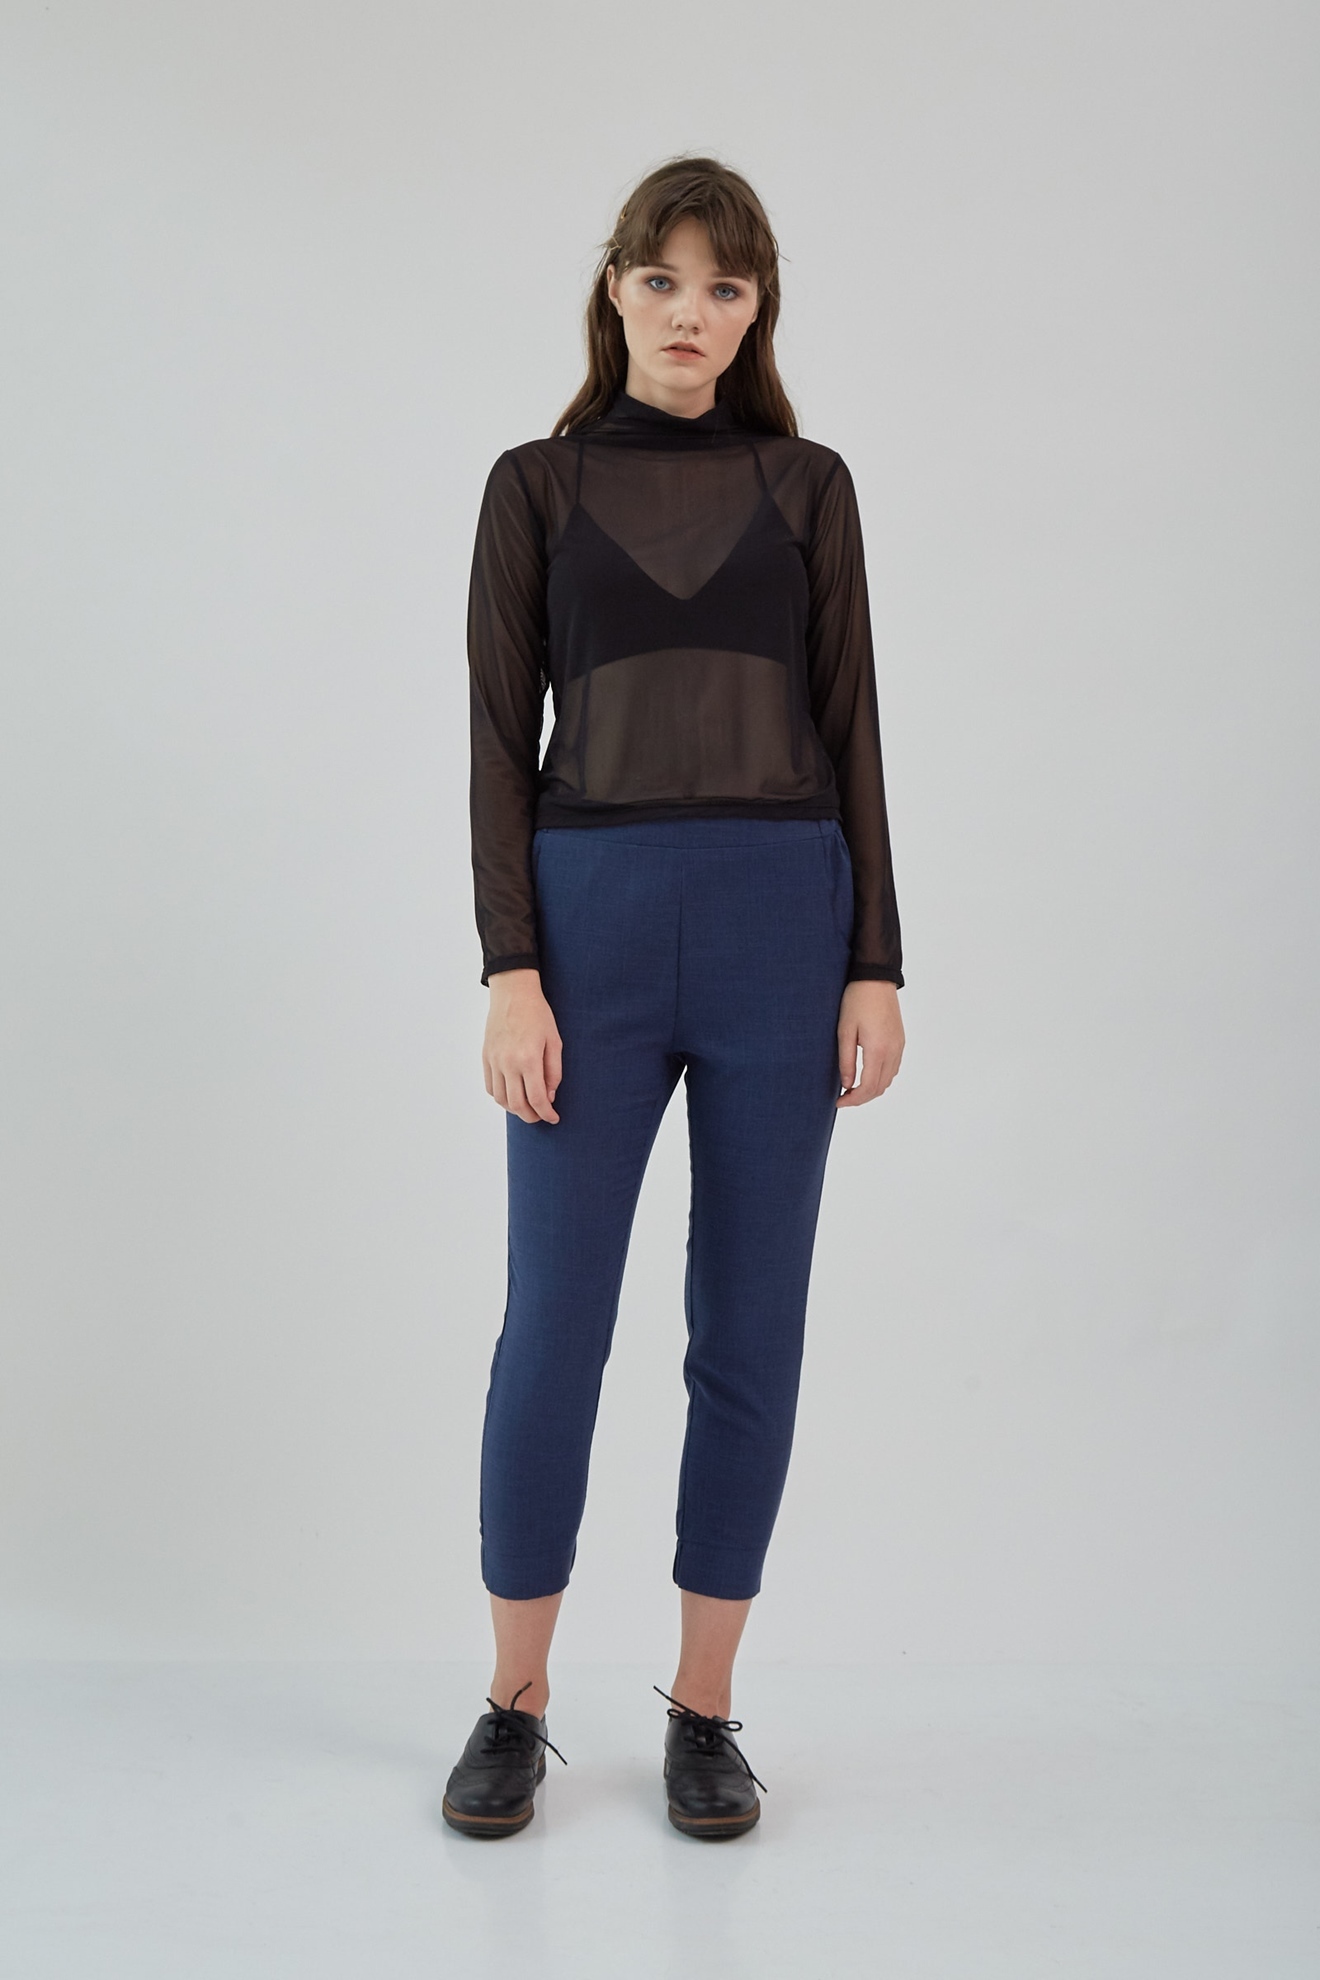 Picture of Monic Mesh Top Black 